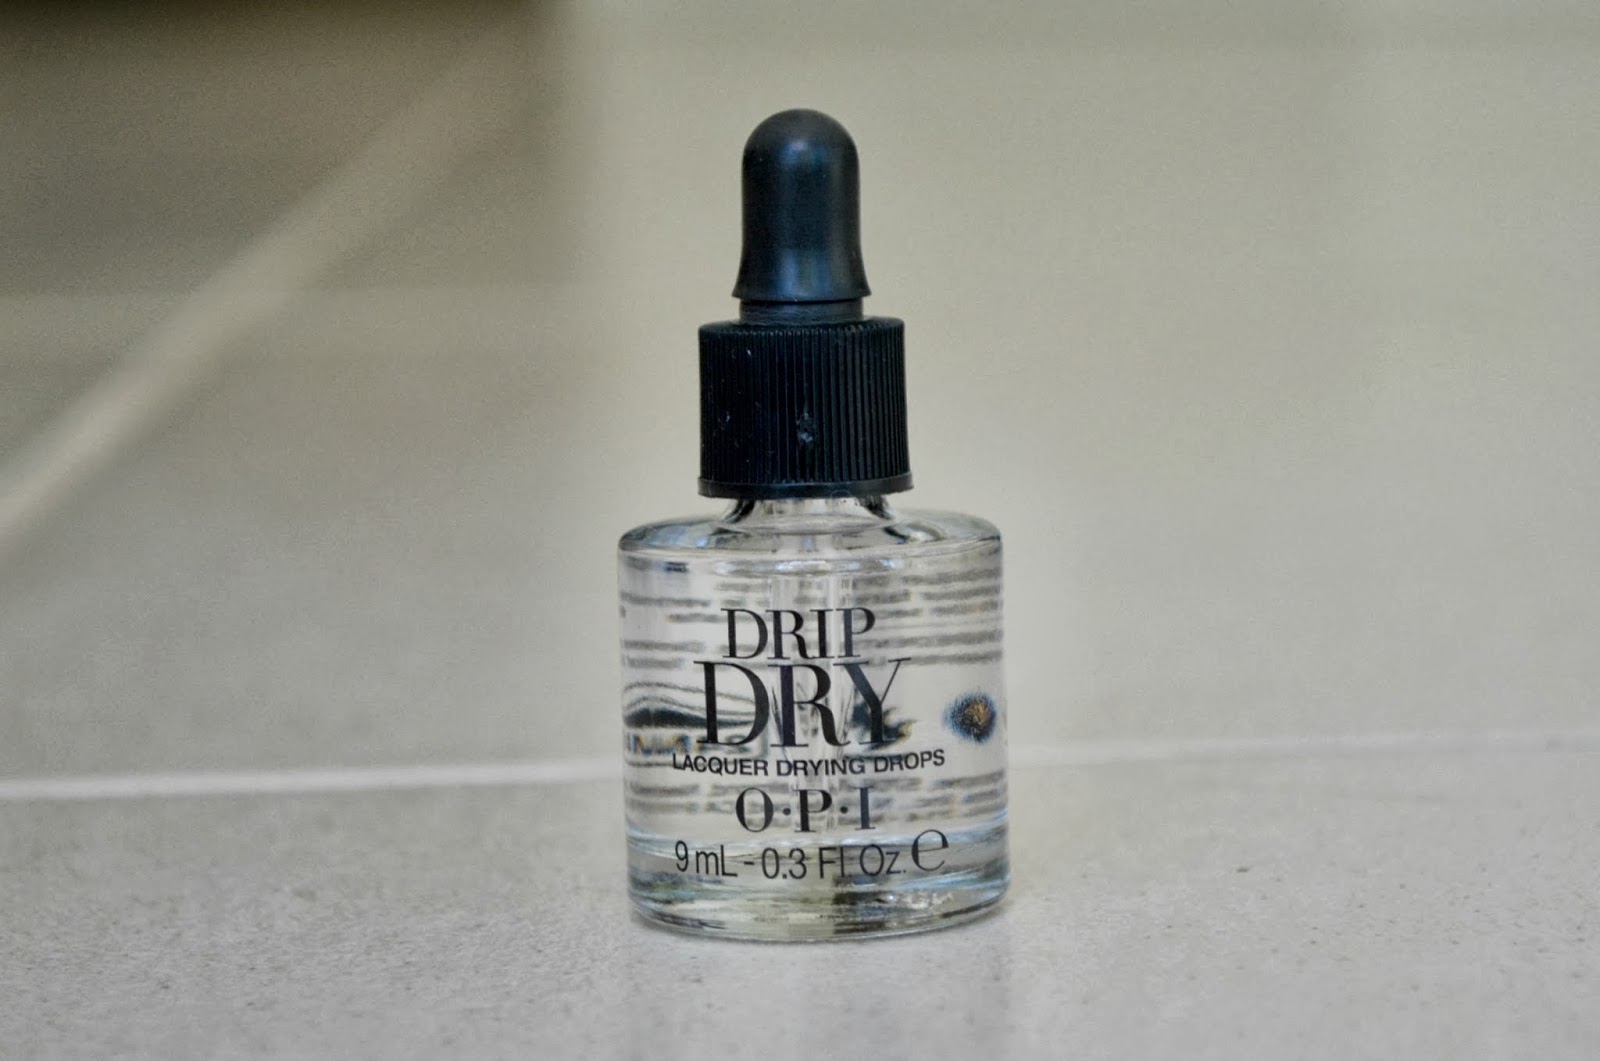 OPI Drip Dry Lacquer Drying Drops - wide 7